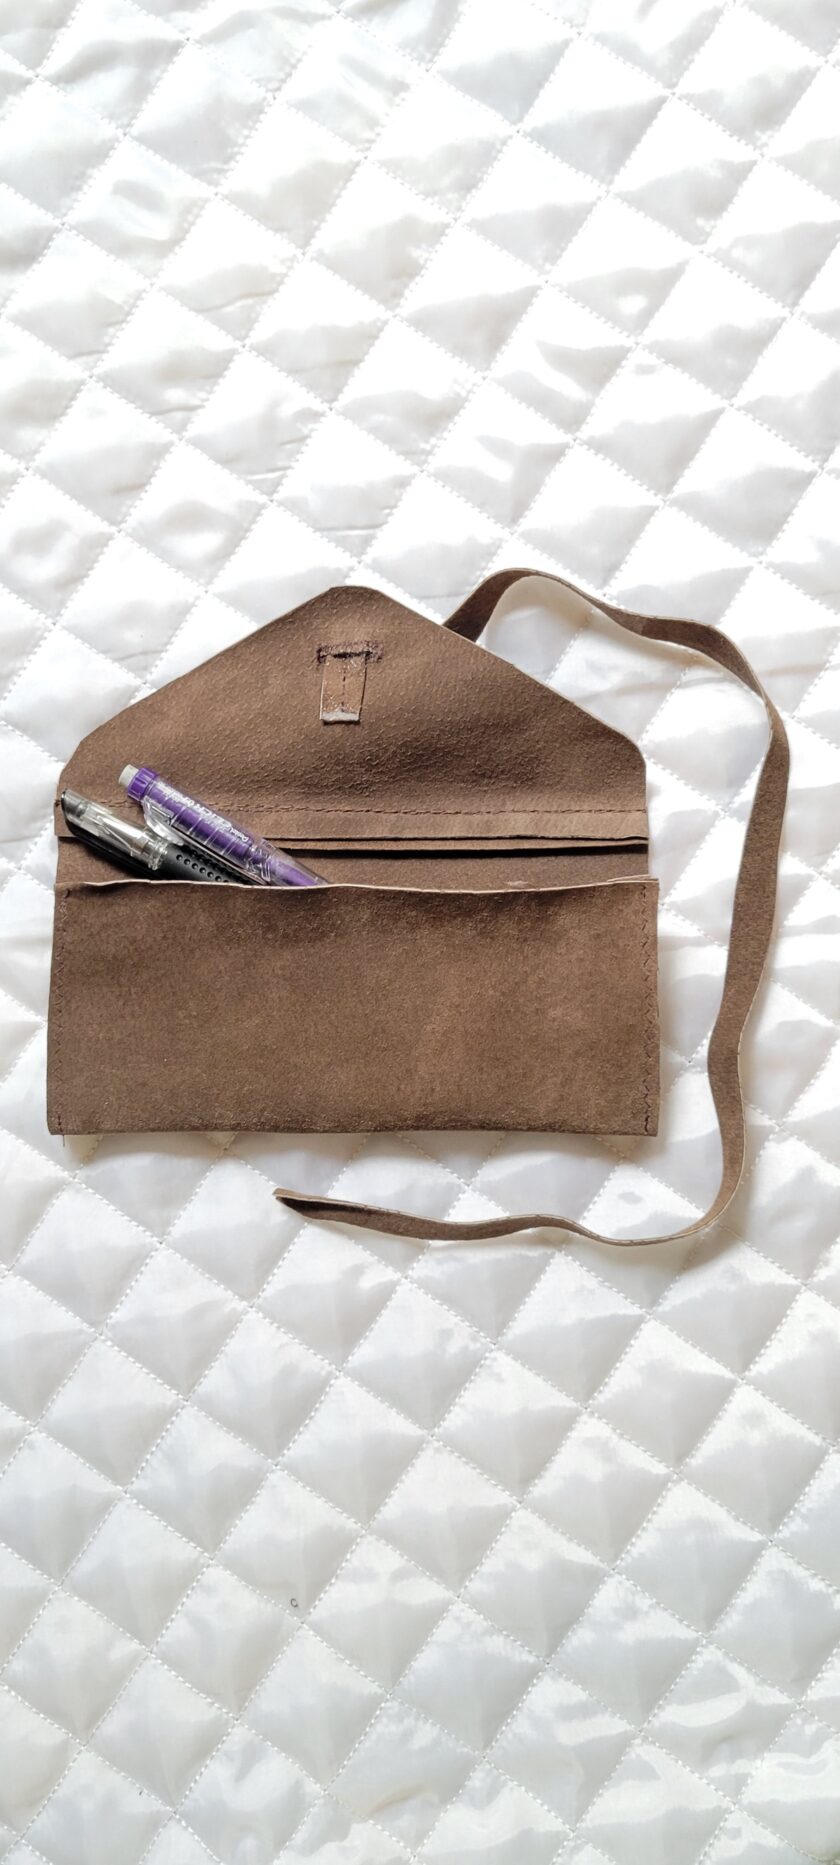 A brown bag with pens in it.